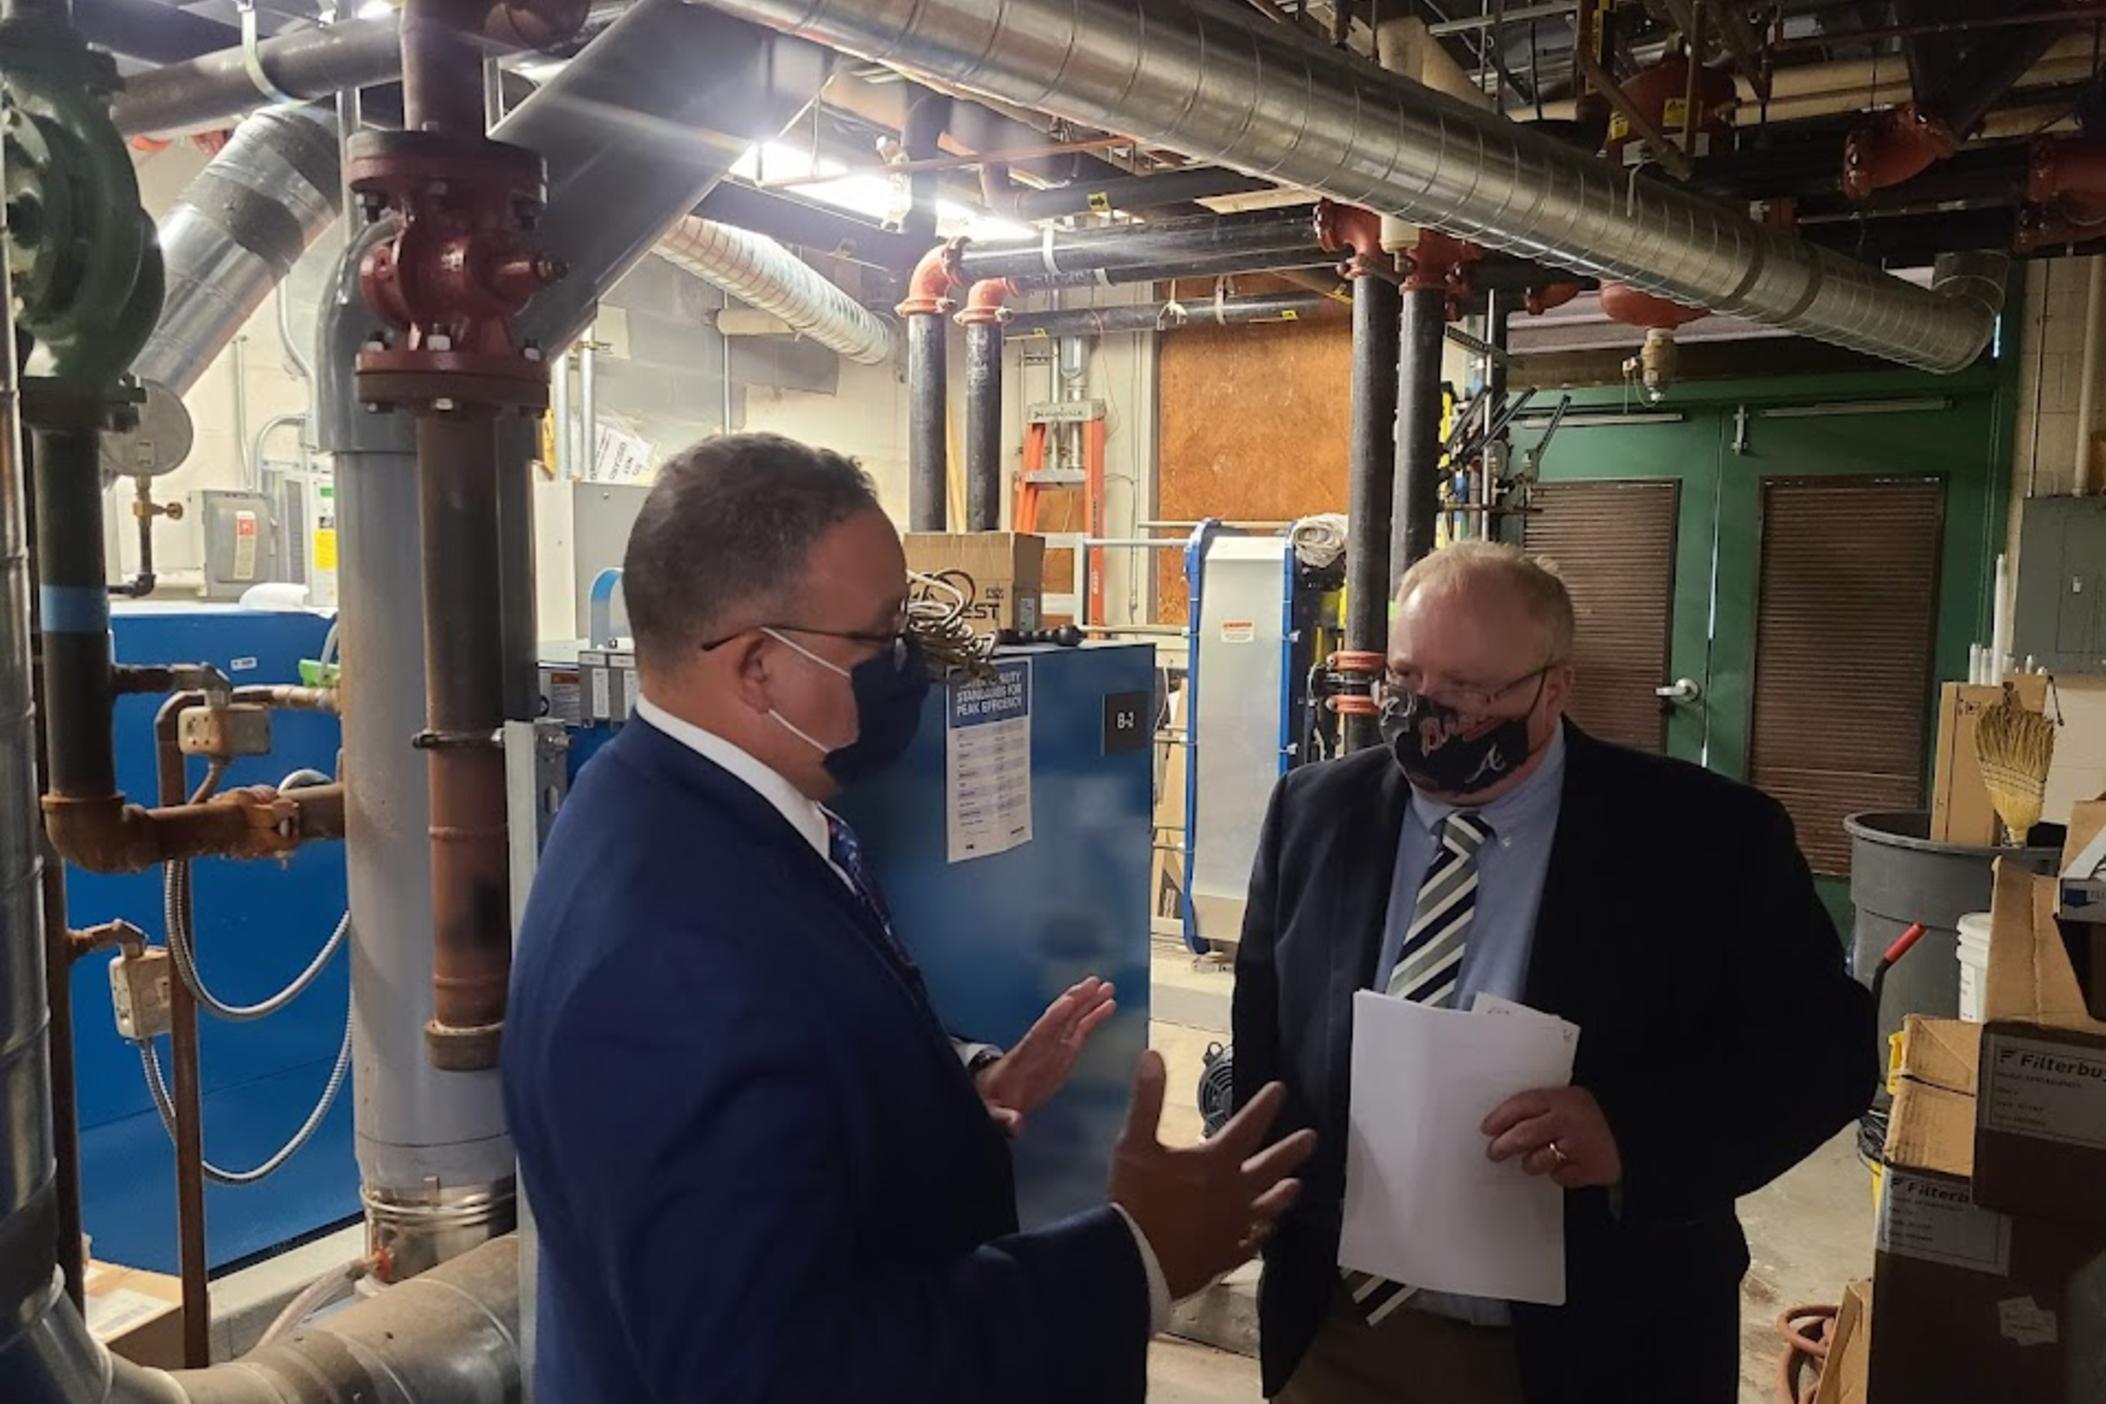 U.S. Secretary of Education Miguel Cardona (left) speaks to the operations manager of Kelley Lake Elementary in the boiler room about ventilation changes during a visit to the DeKalb County school Friday, July 23, 2021.